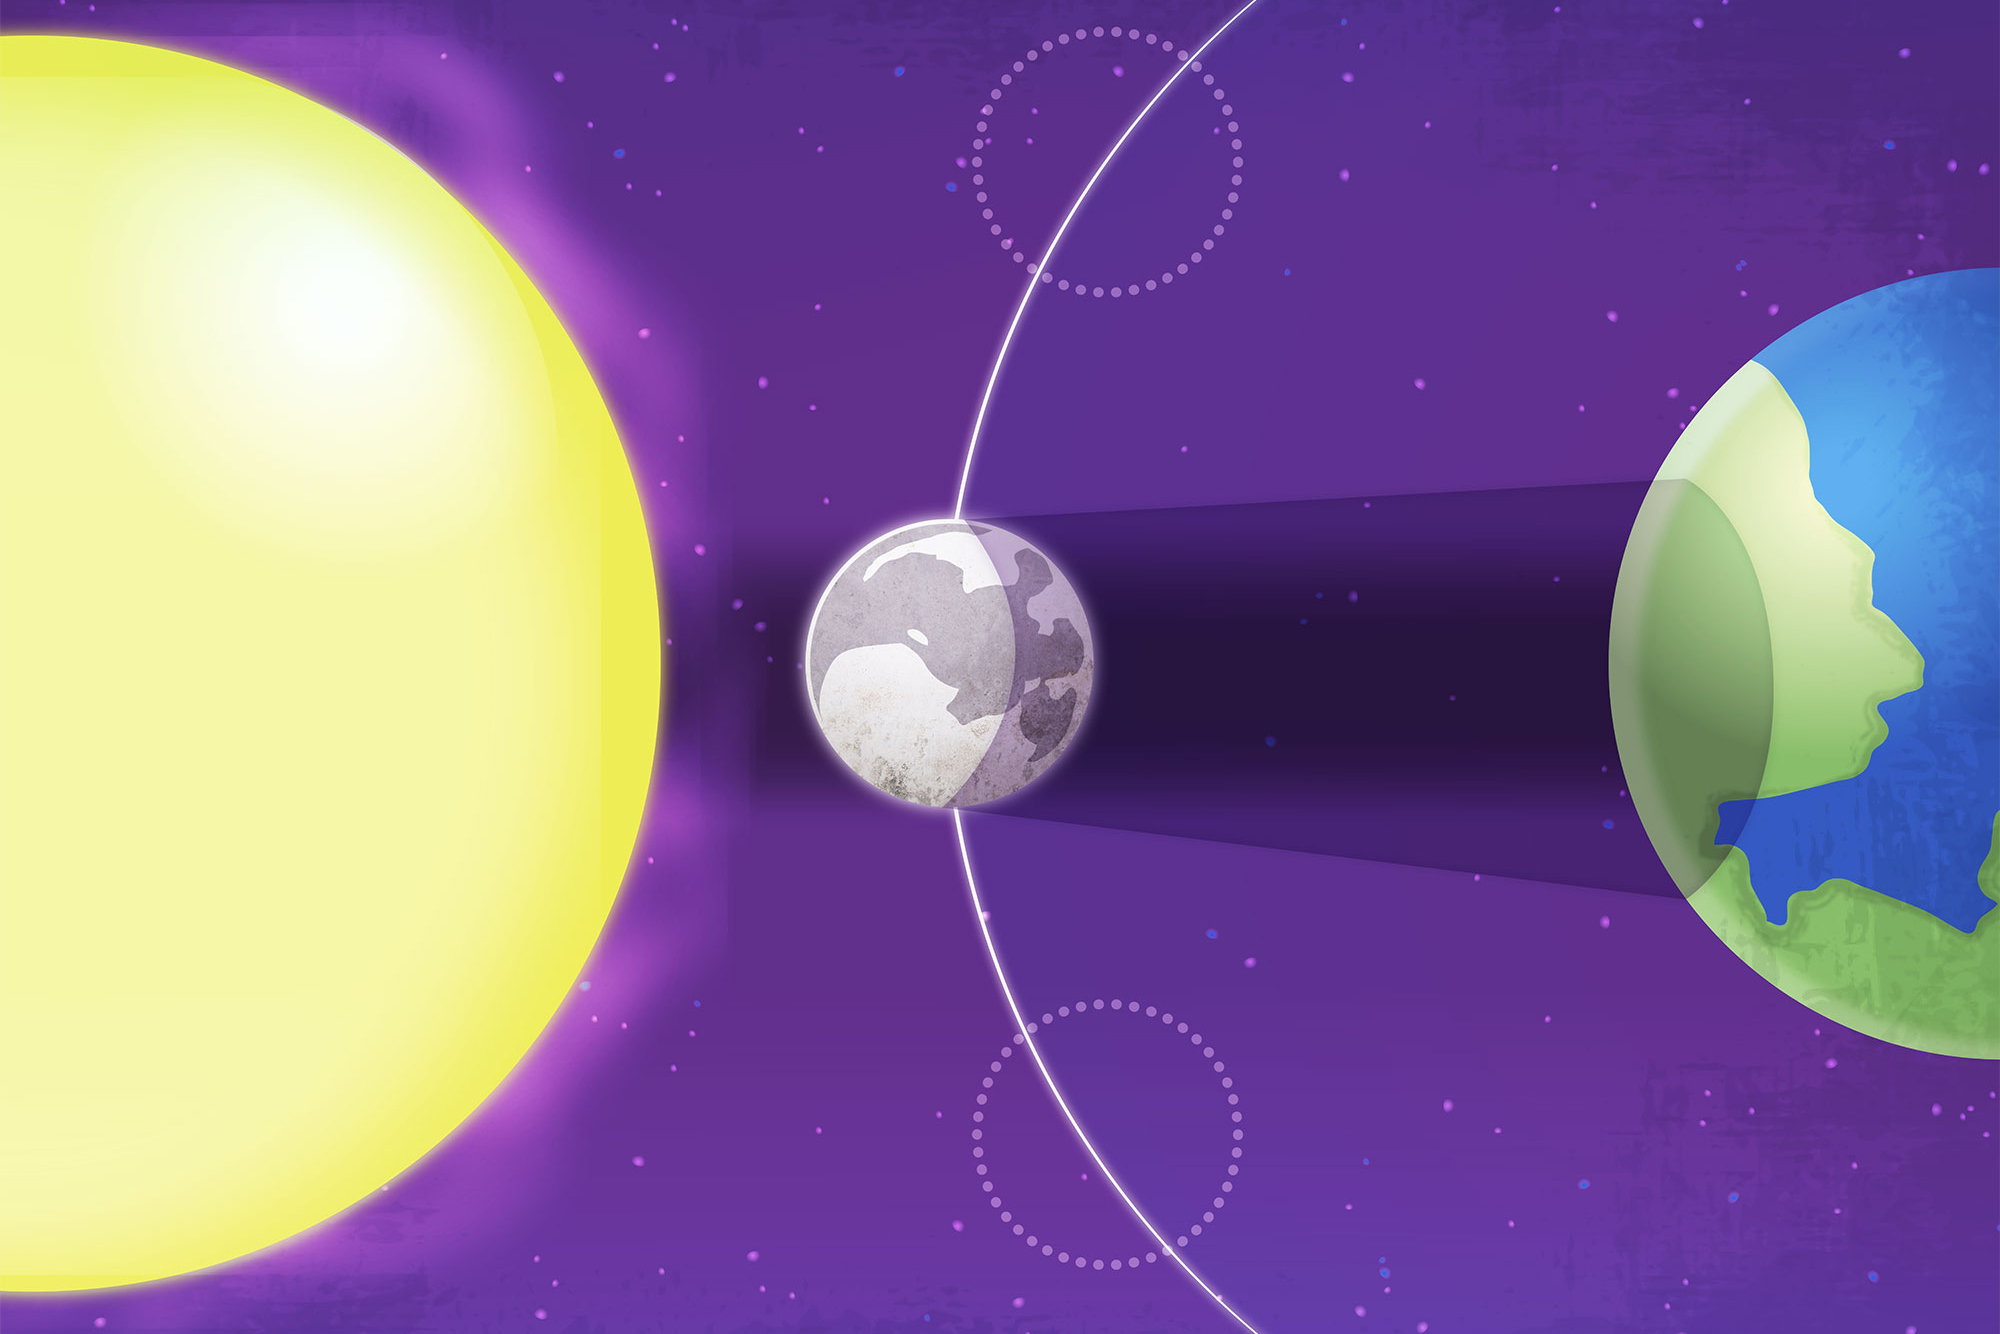 illustration of sun and earth with a diagram of the moon in the middle. the sun's light onto the earth is blocked by the center position of the moon